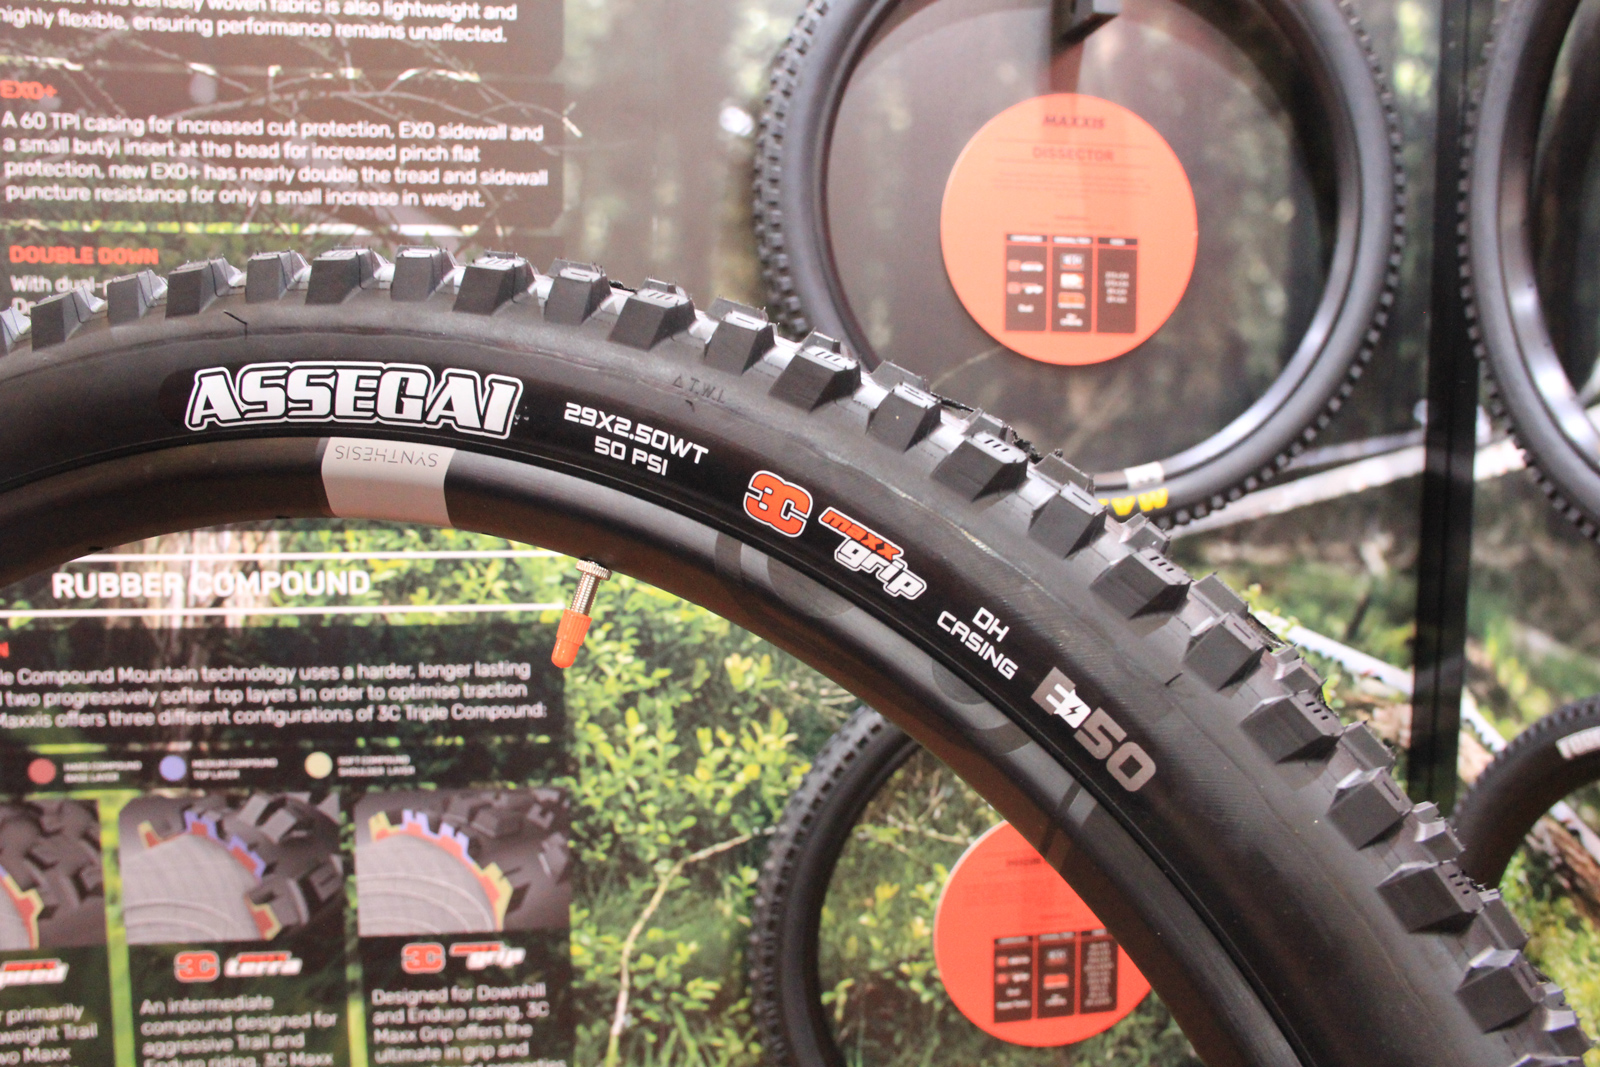 Maxxis E50 Mountain Bike Tires are Certified for eBikes at Speeds up to 50 KPH